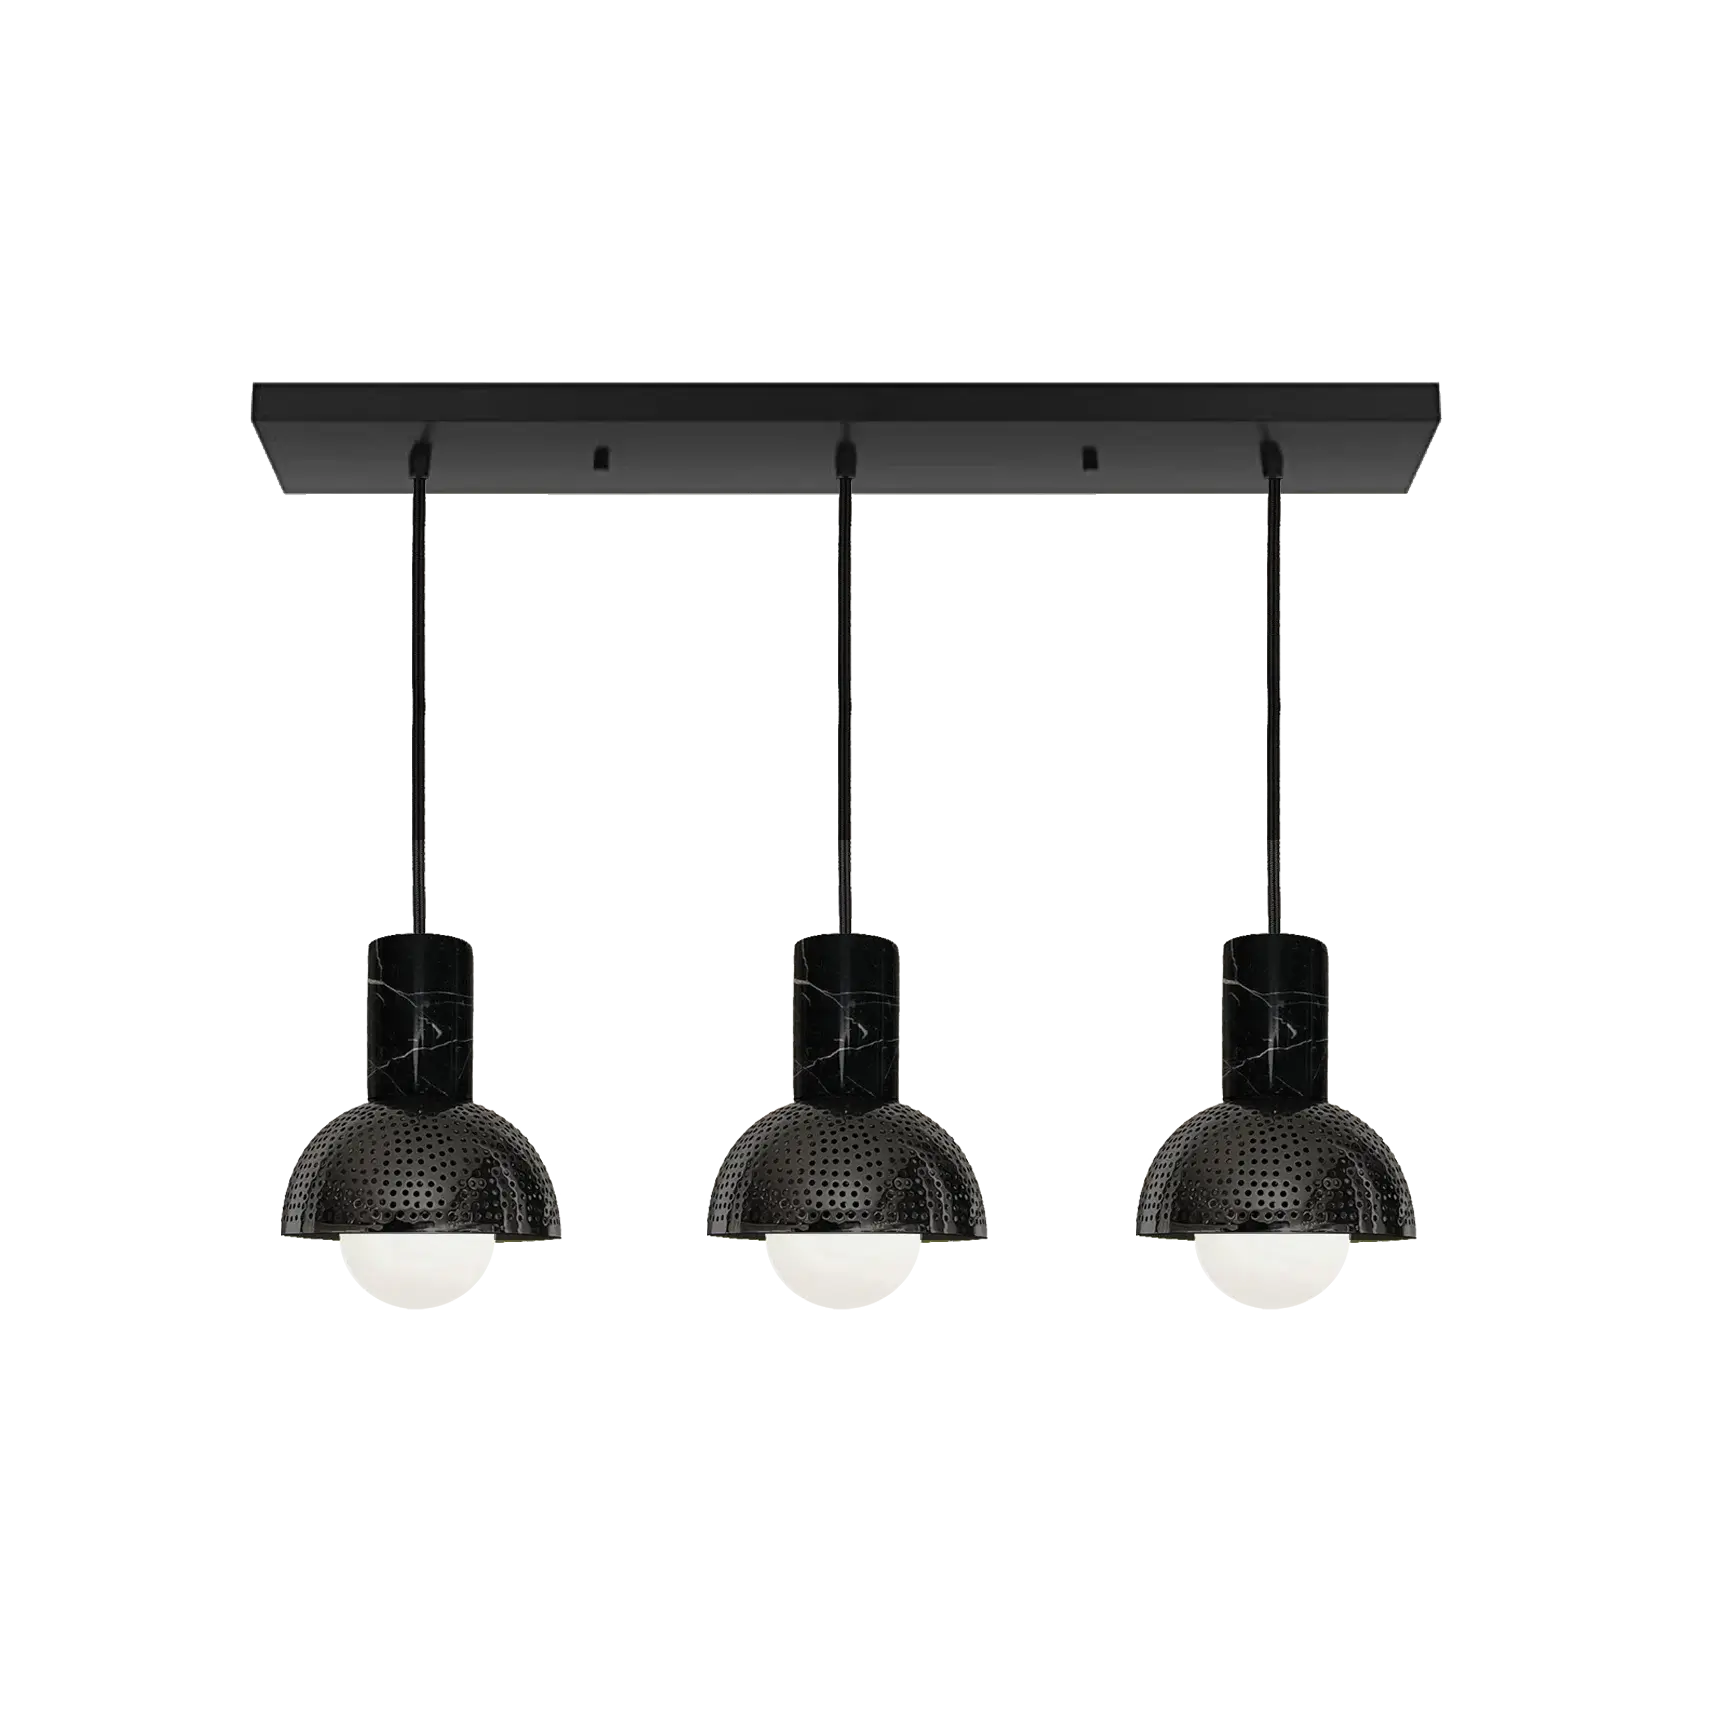 Dounia home chandelier in black made of Metal, Model: Maria